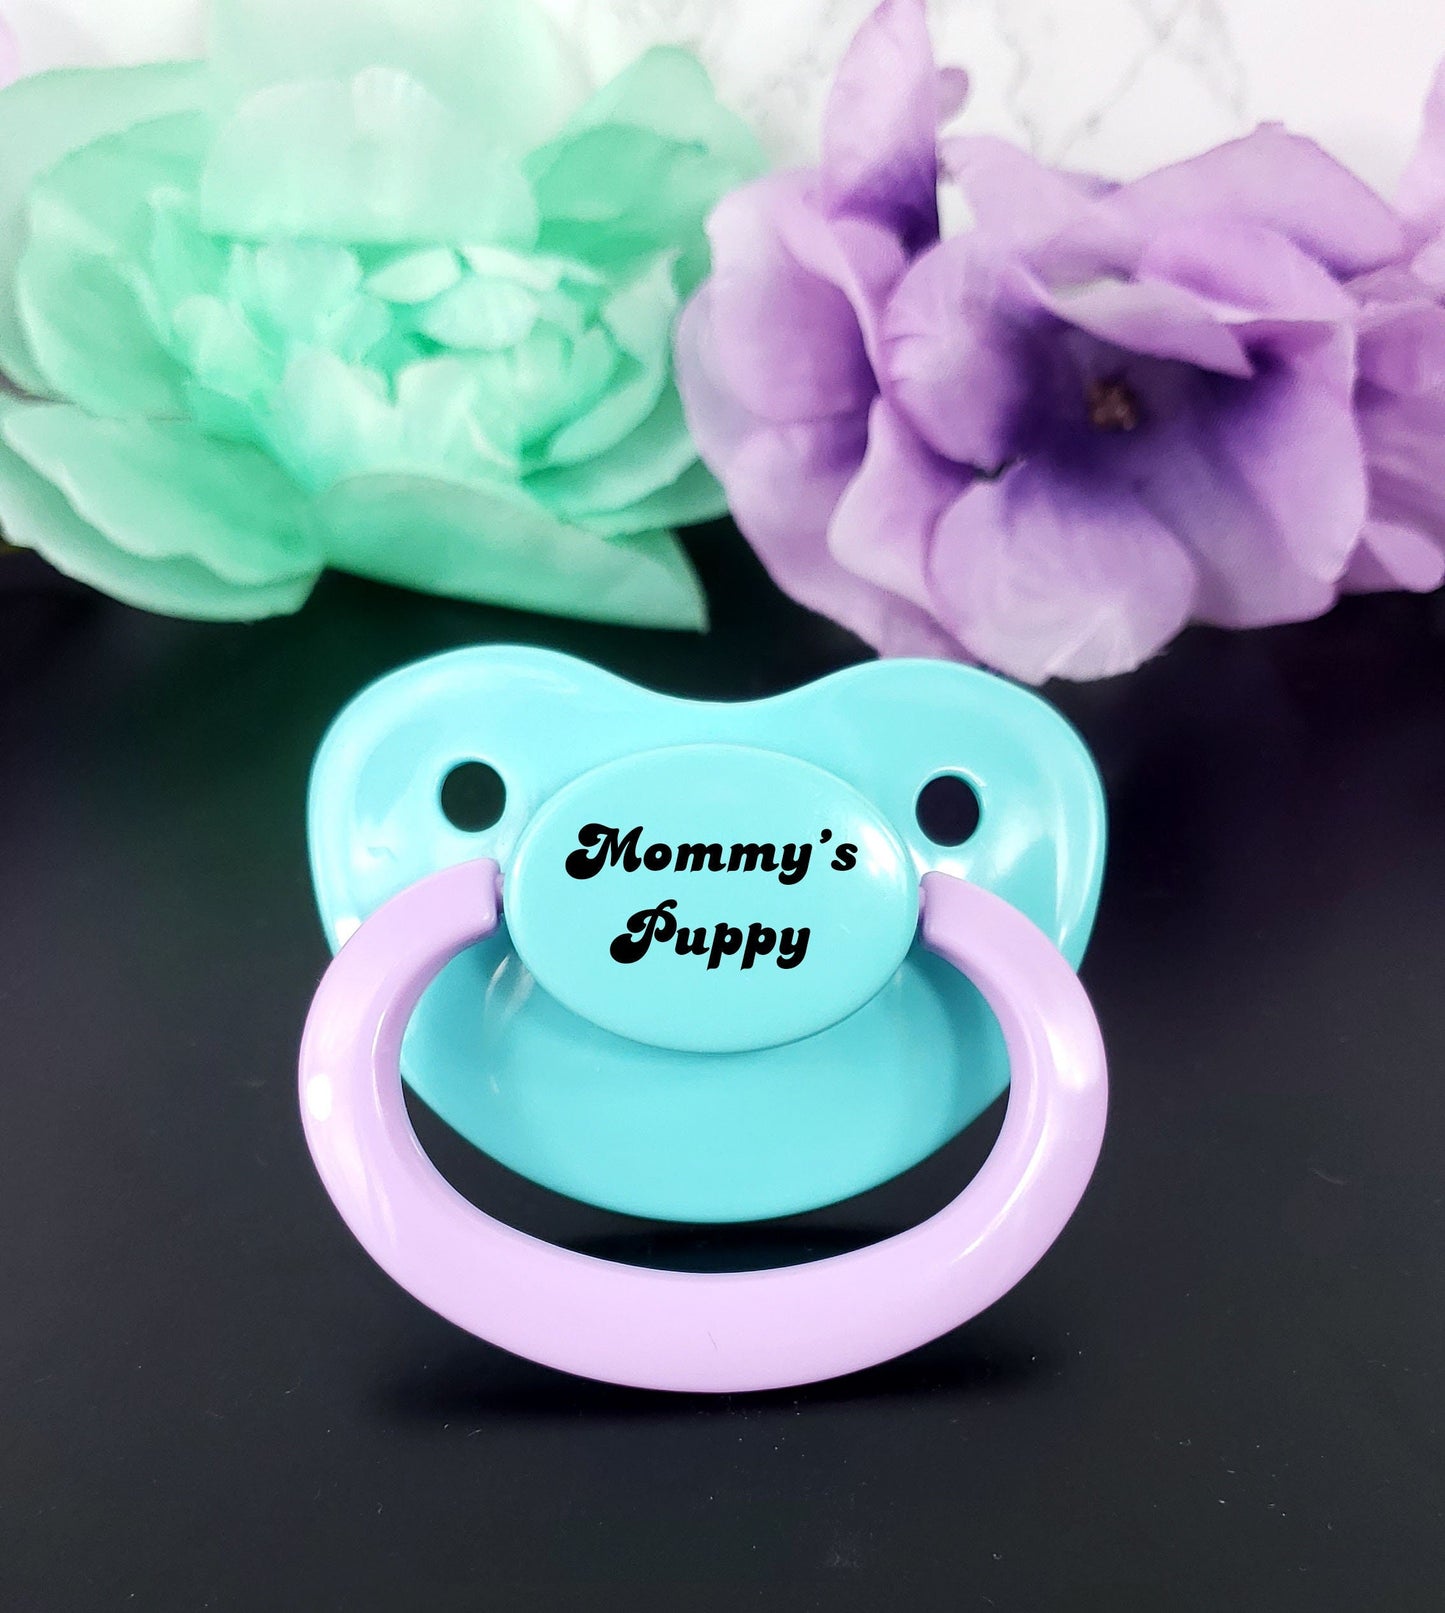 Mommy's Puppy Adult Pacifier